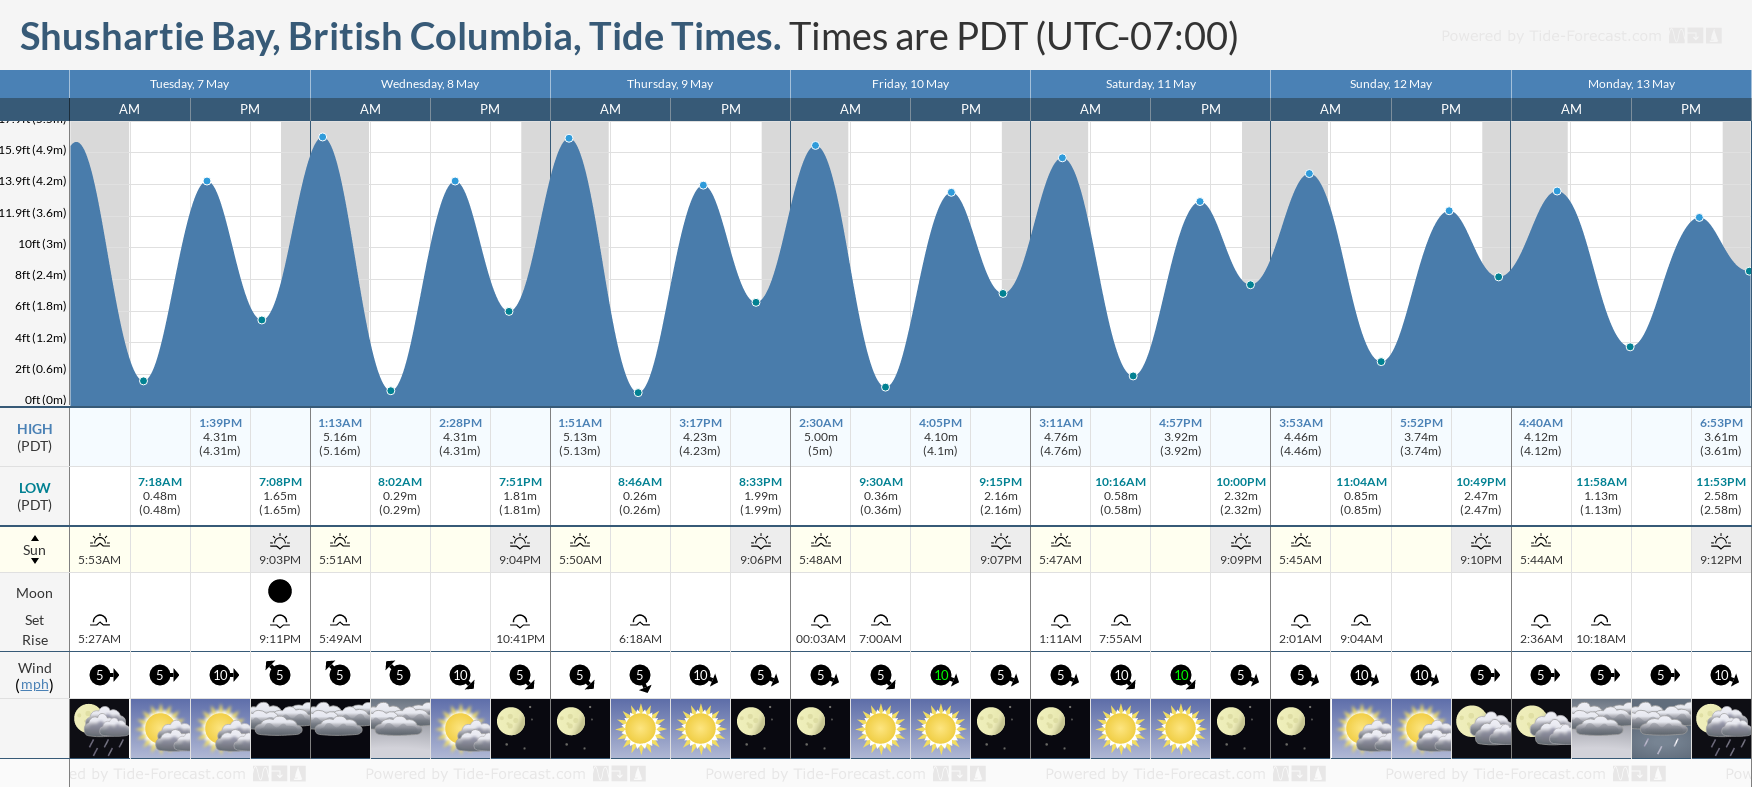 Shushartie Bay, British Columbia Tide Chart including high and low tide tide times for the next 7 days